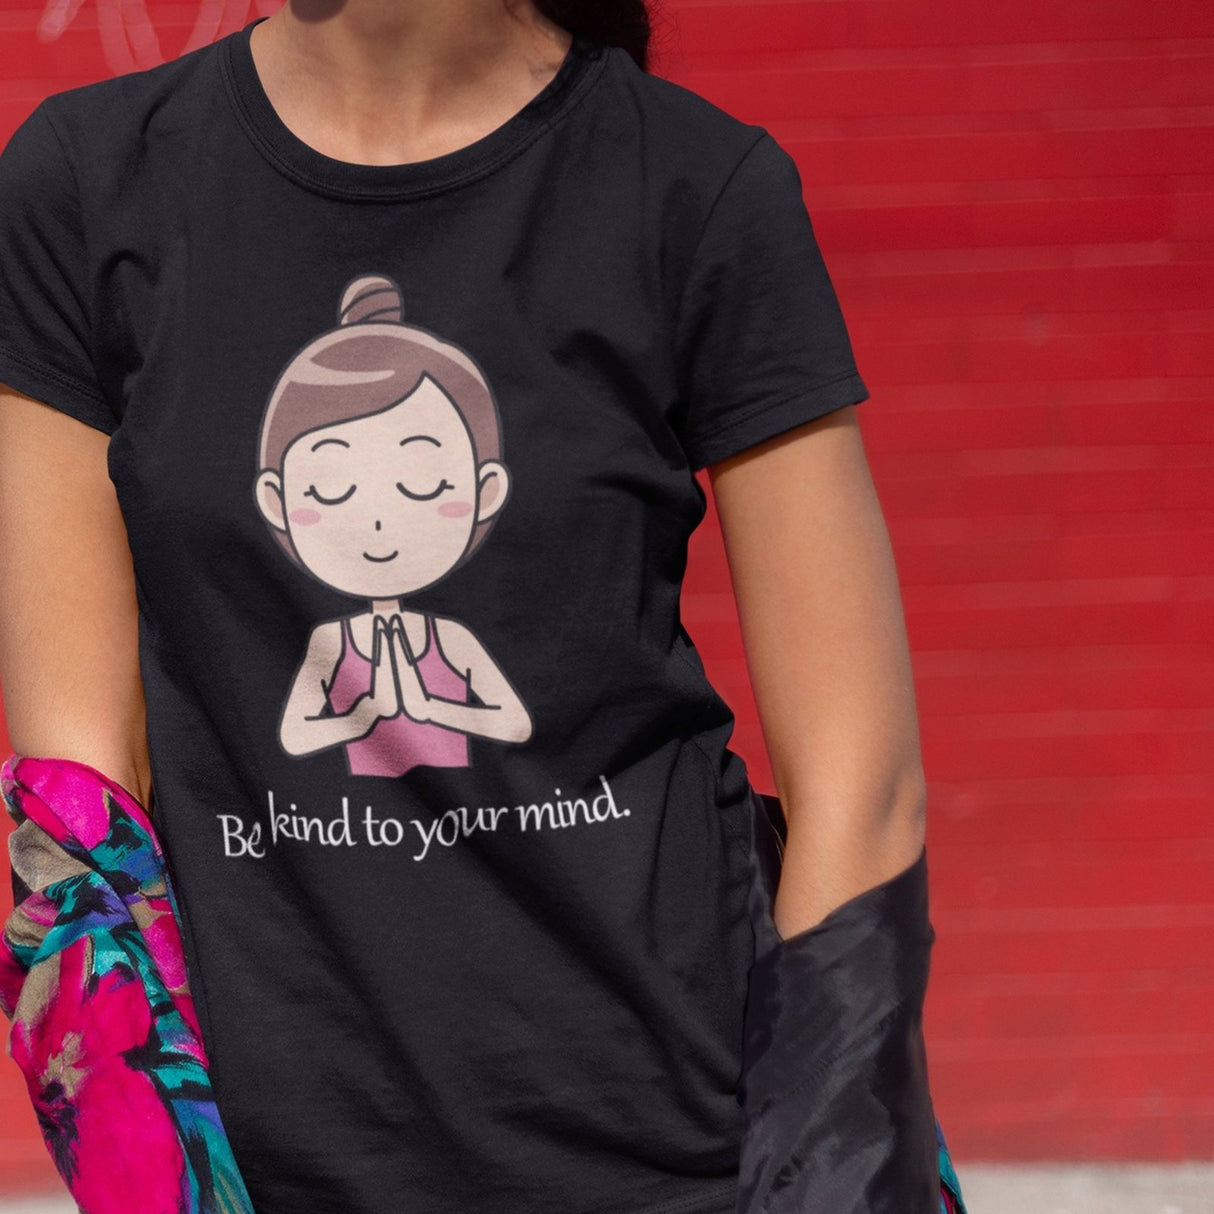 be-kind-to-your-mind-mental-health-tee-be-kind-t-shirt-self-care-tee-yoga-t-shirt-workout-tee-1#color_black